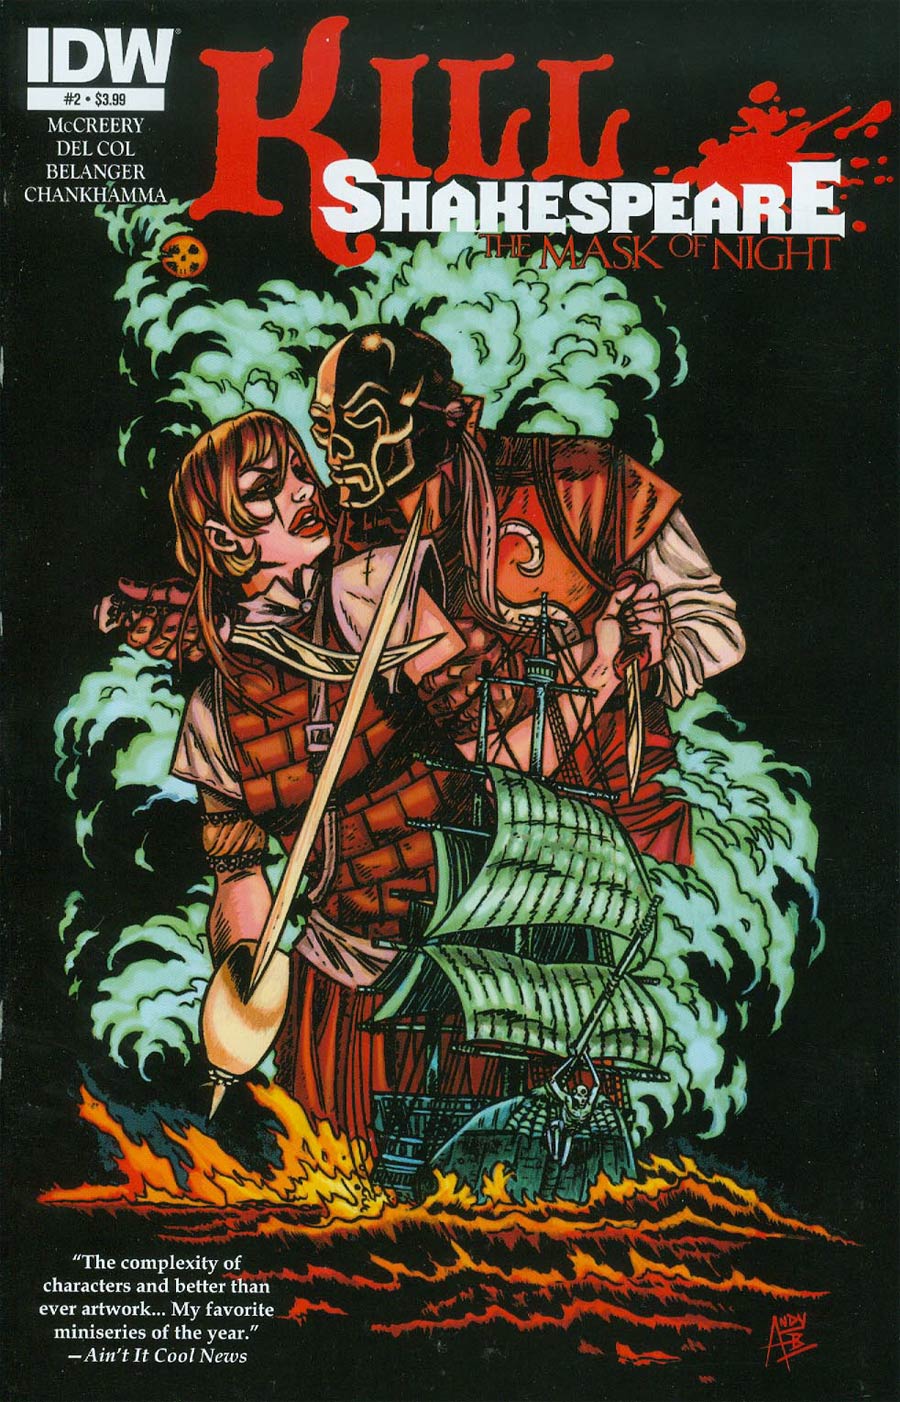 Kill Shakespeare Mask Of Night #2 Cover A Regular Andy Belanger Cover